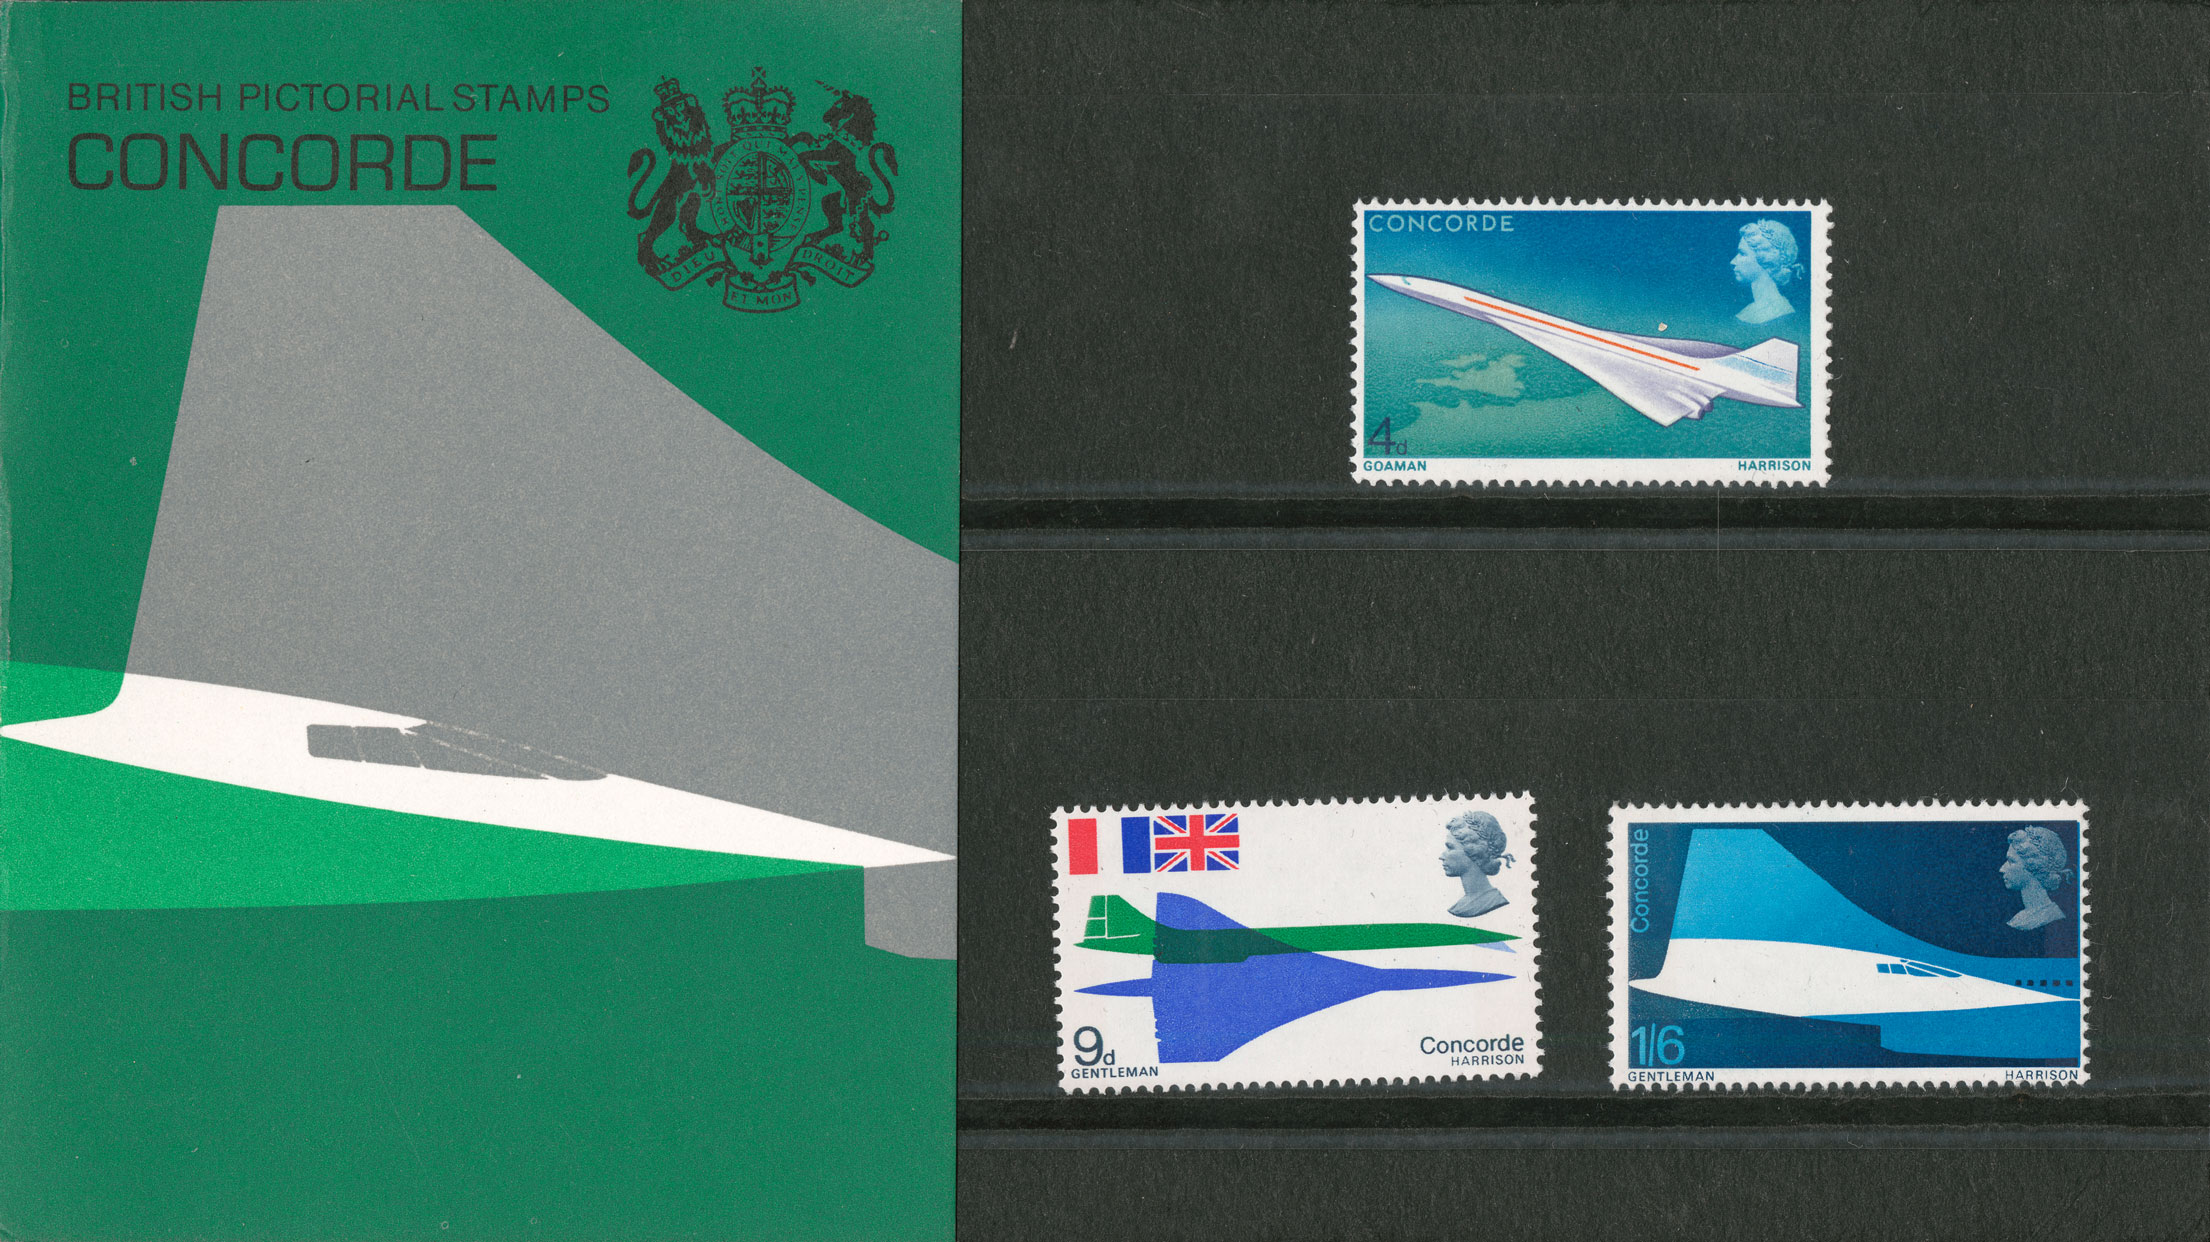 The Concorde Presentation Pack consisting of the 3 issued stamp designs.